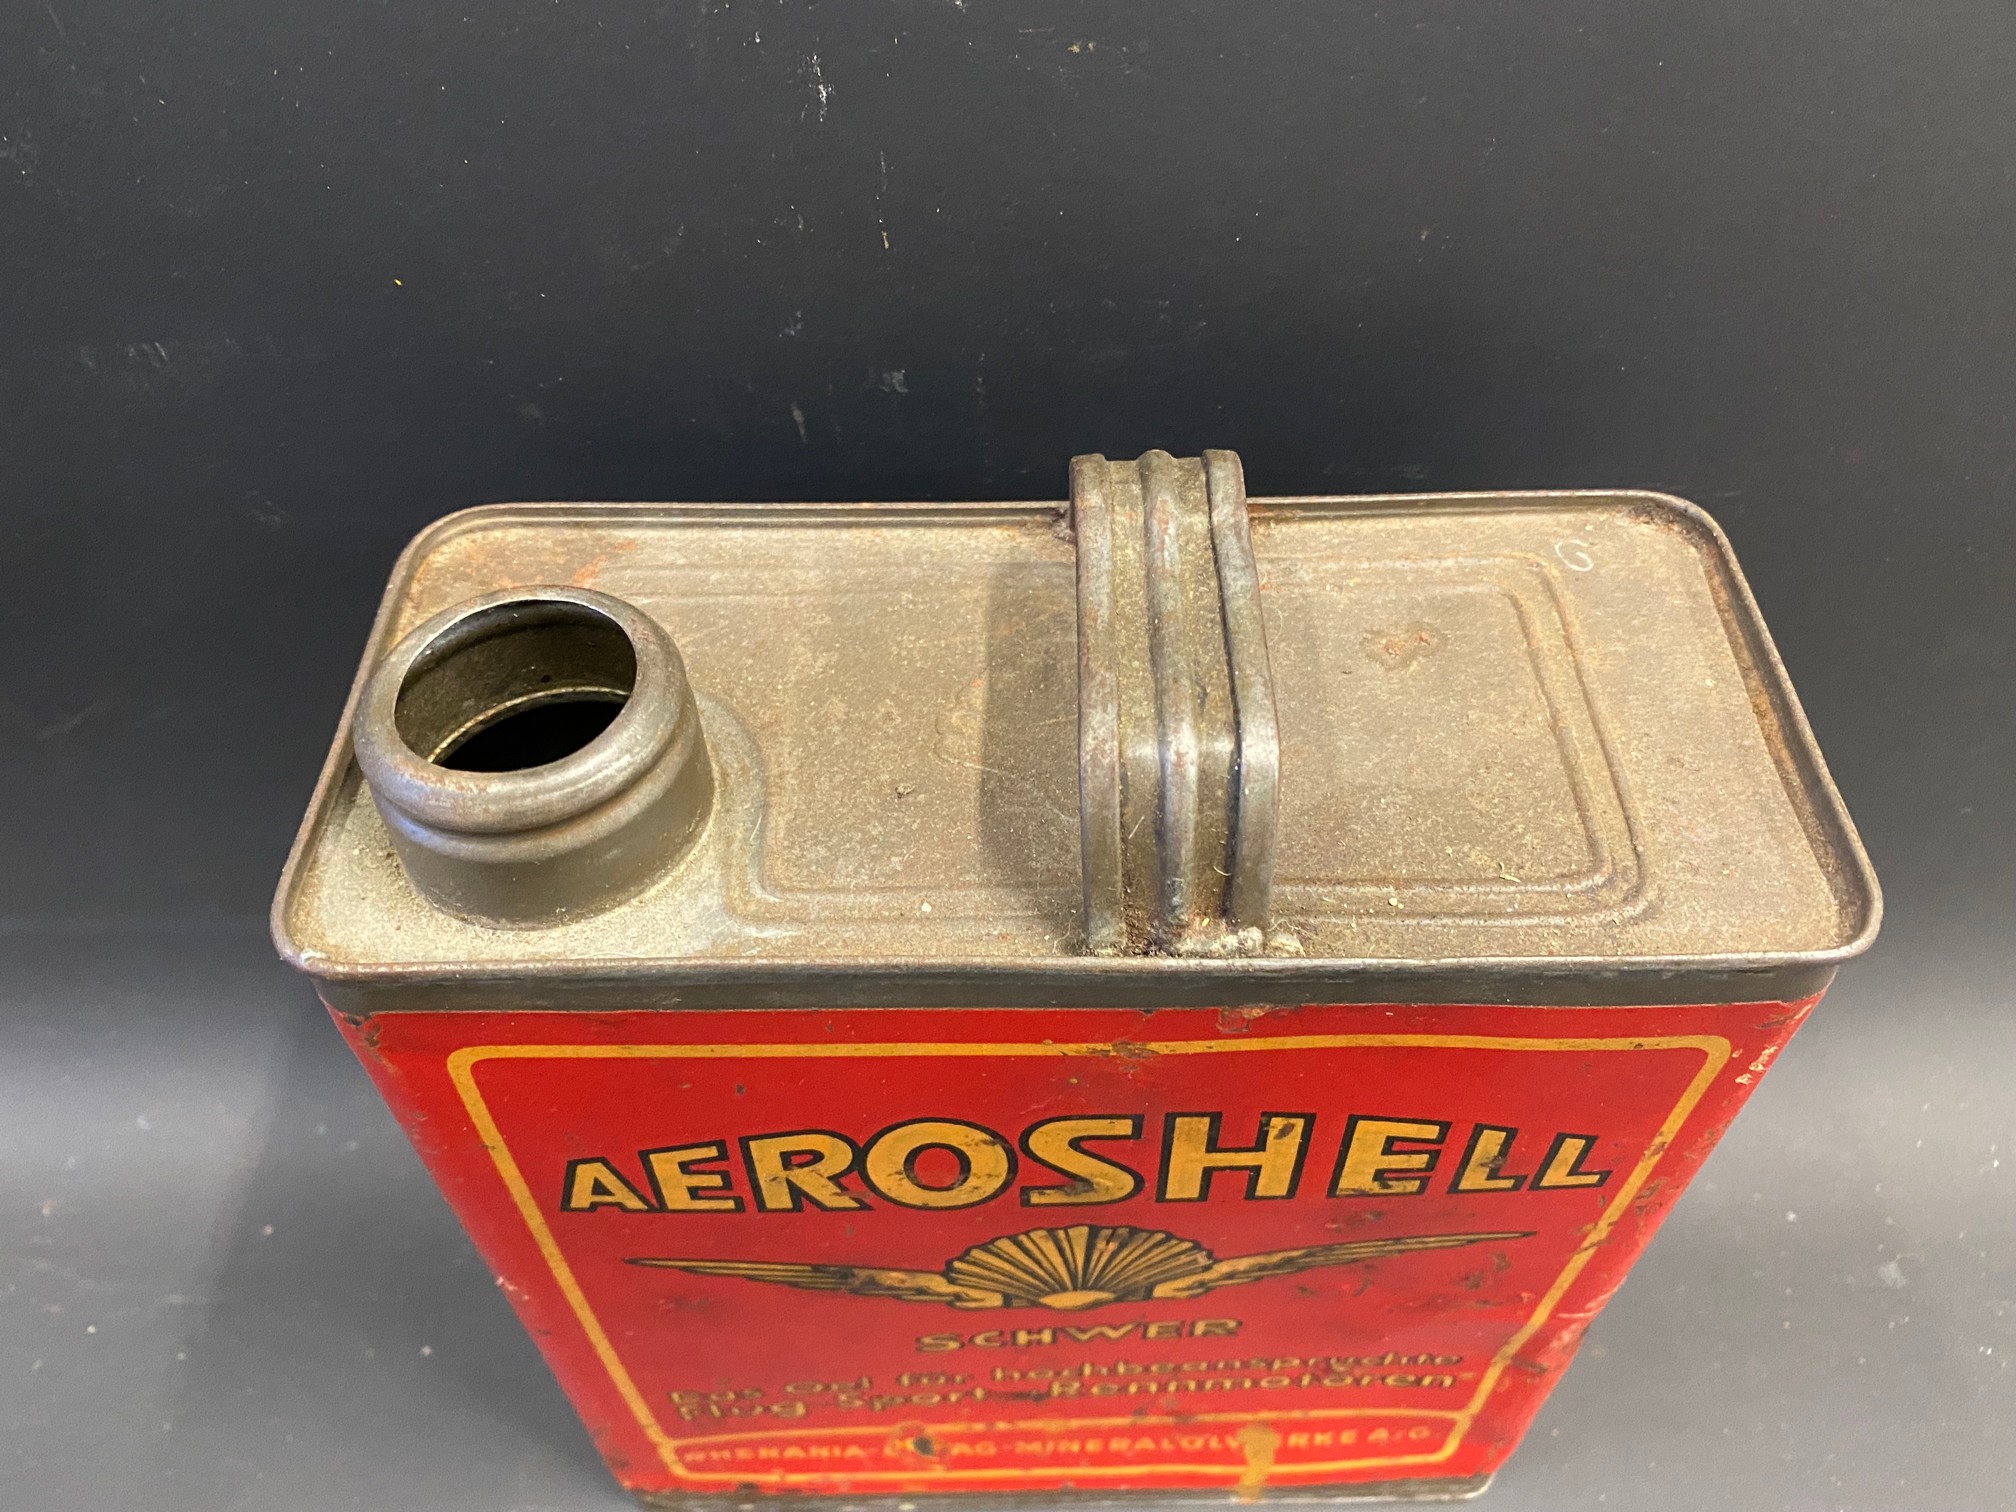 An early Aeroshell rectangular can, possibly half gallon, foreign version. - Image 5 of 6